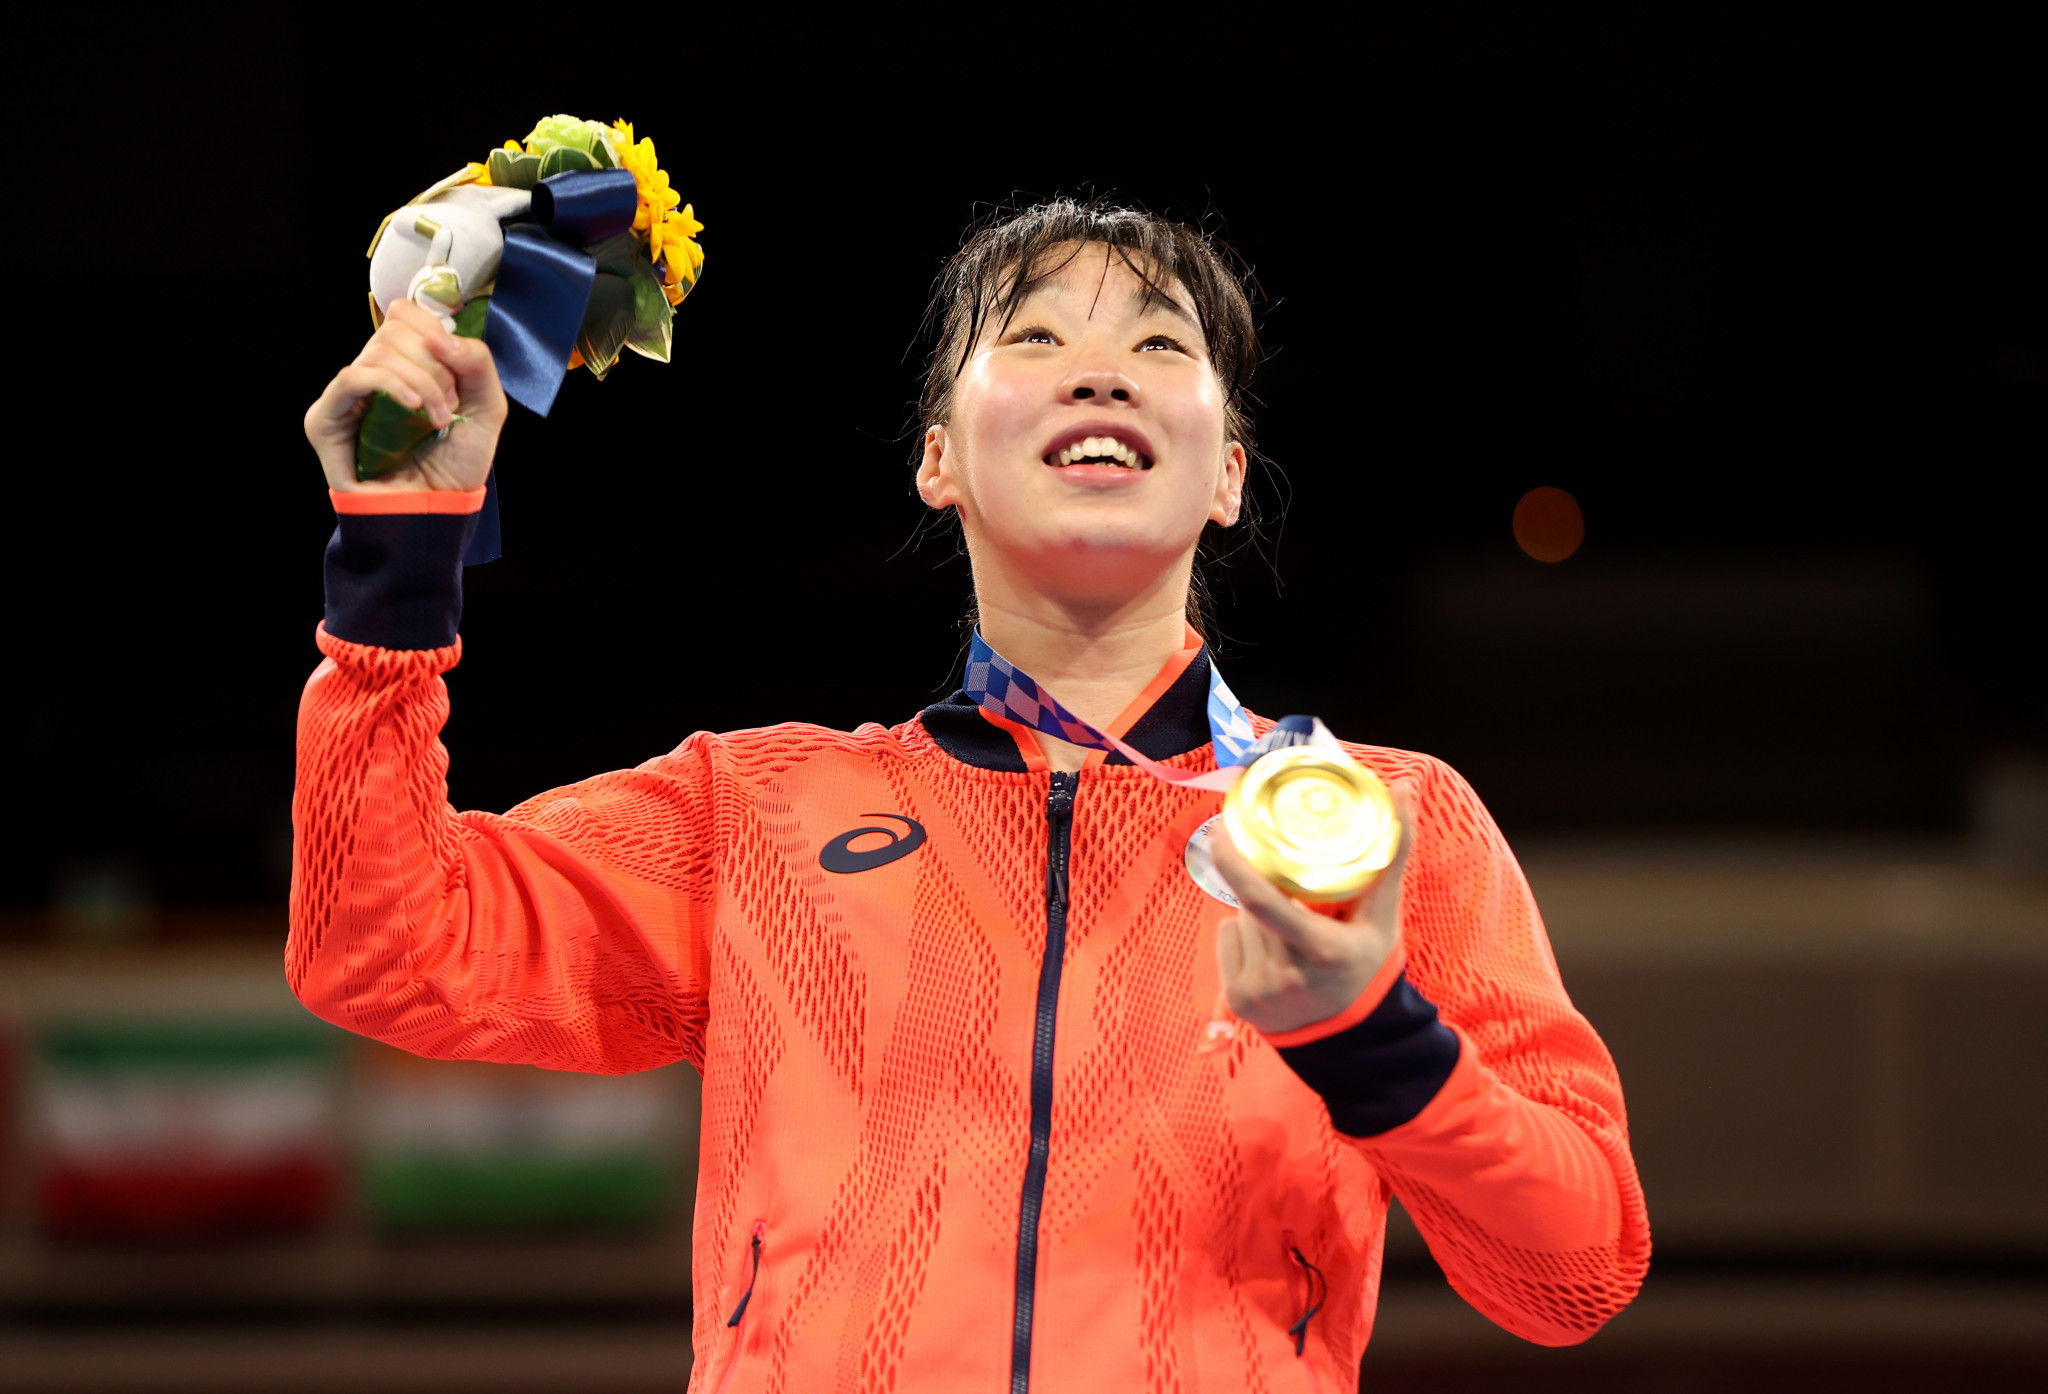 Tokyo 2020 gold medallist Irie to study amphibians after boxing retirement 